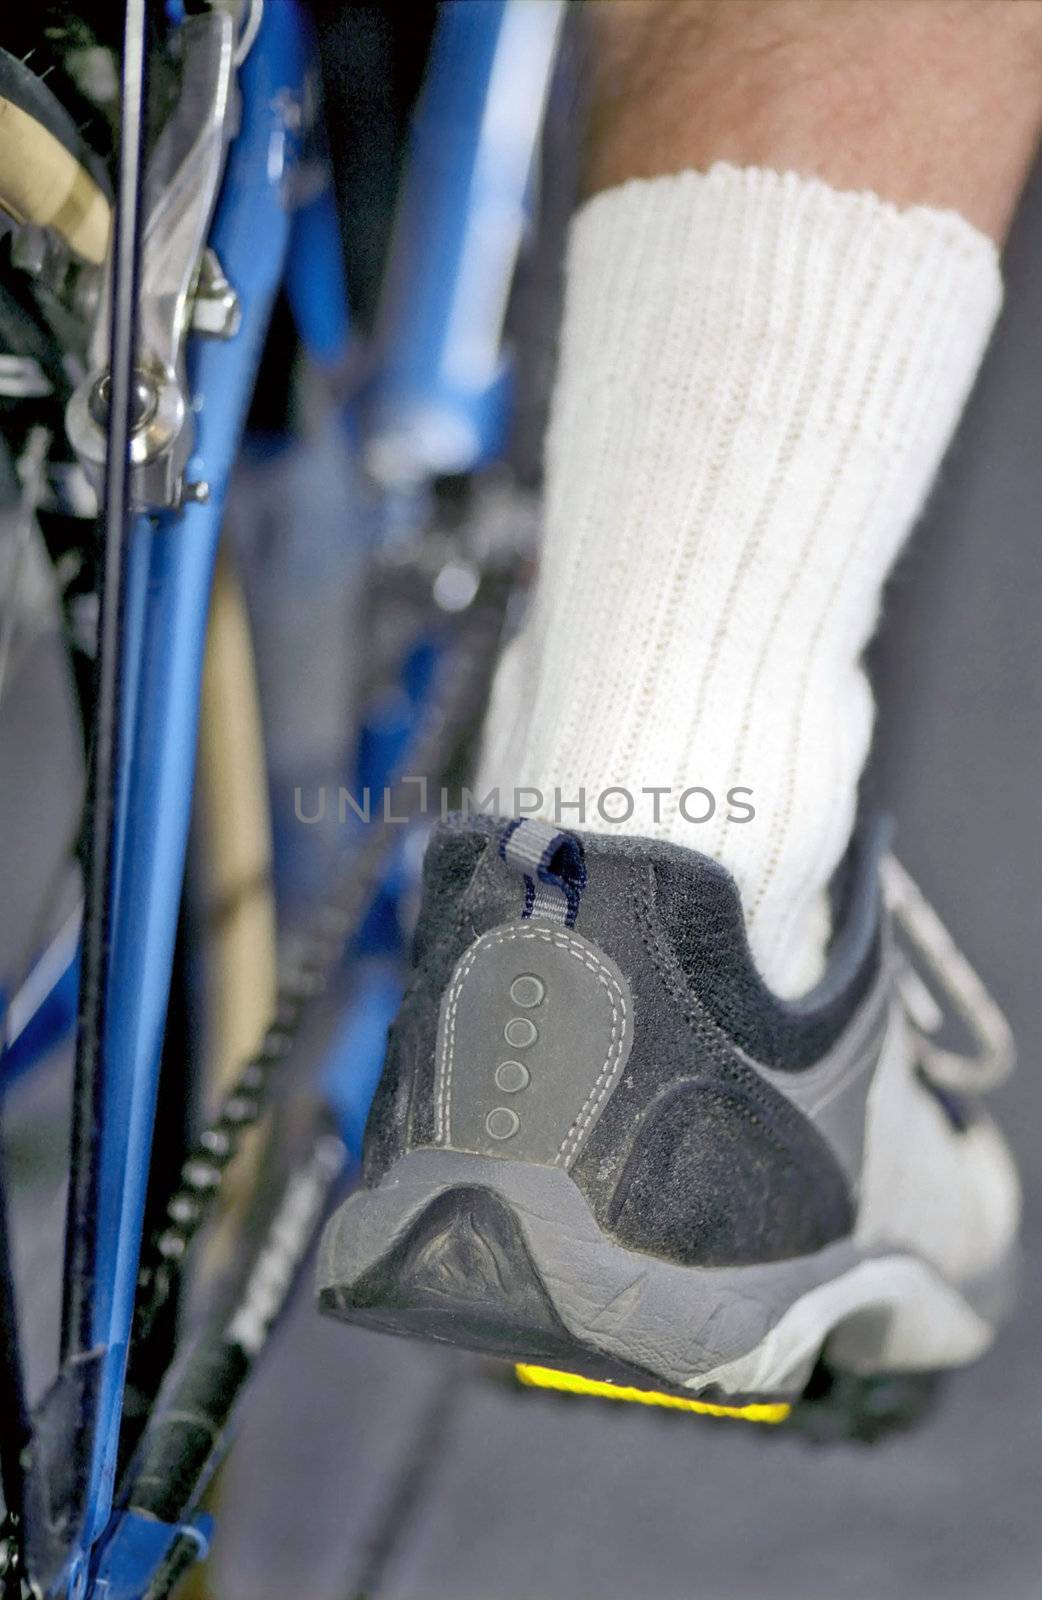 Cycle details and man's foot on pedal in lower position  by mulden